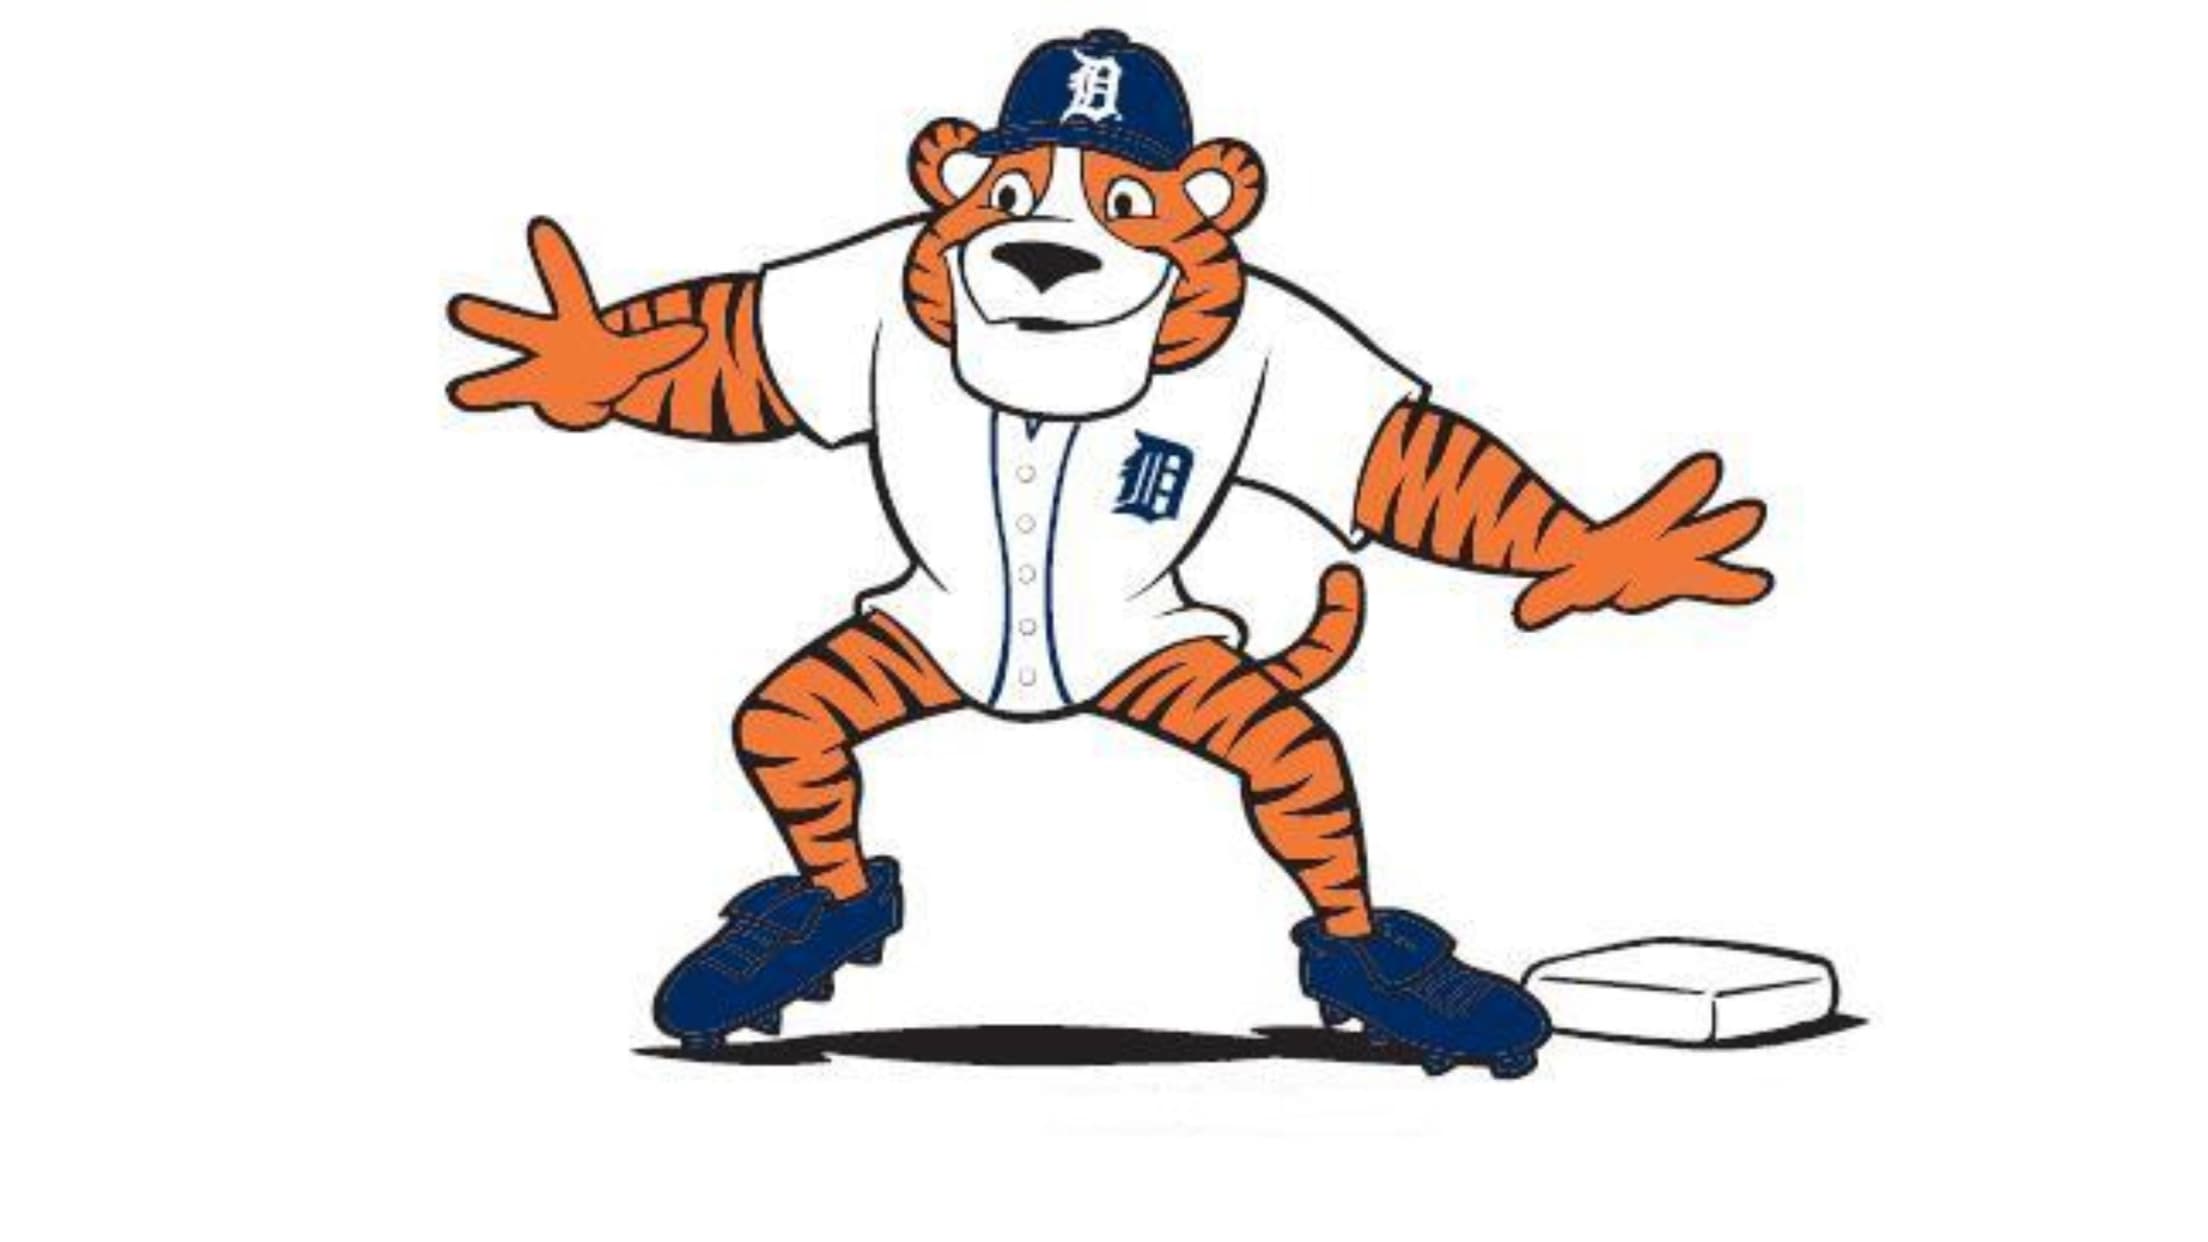 900+ PAWS - Detroit Tigers Mascot ideas in 2023